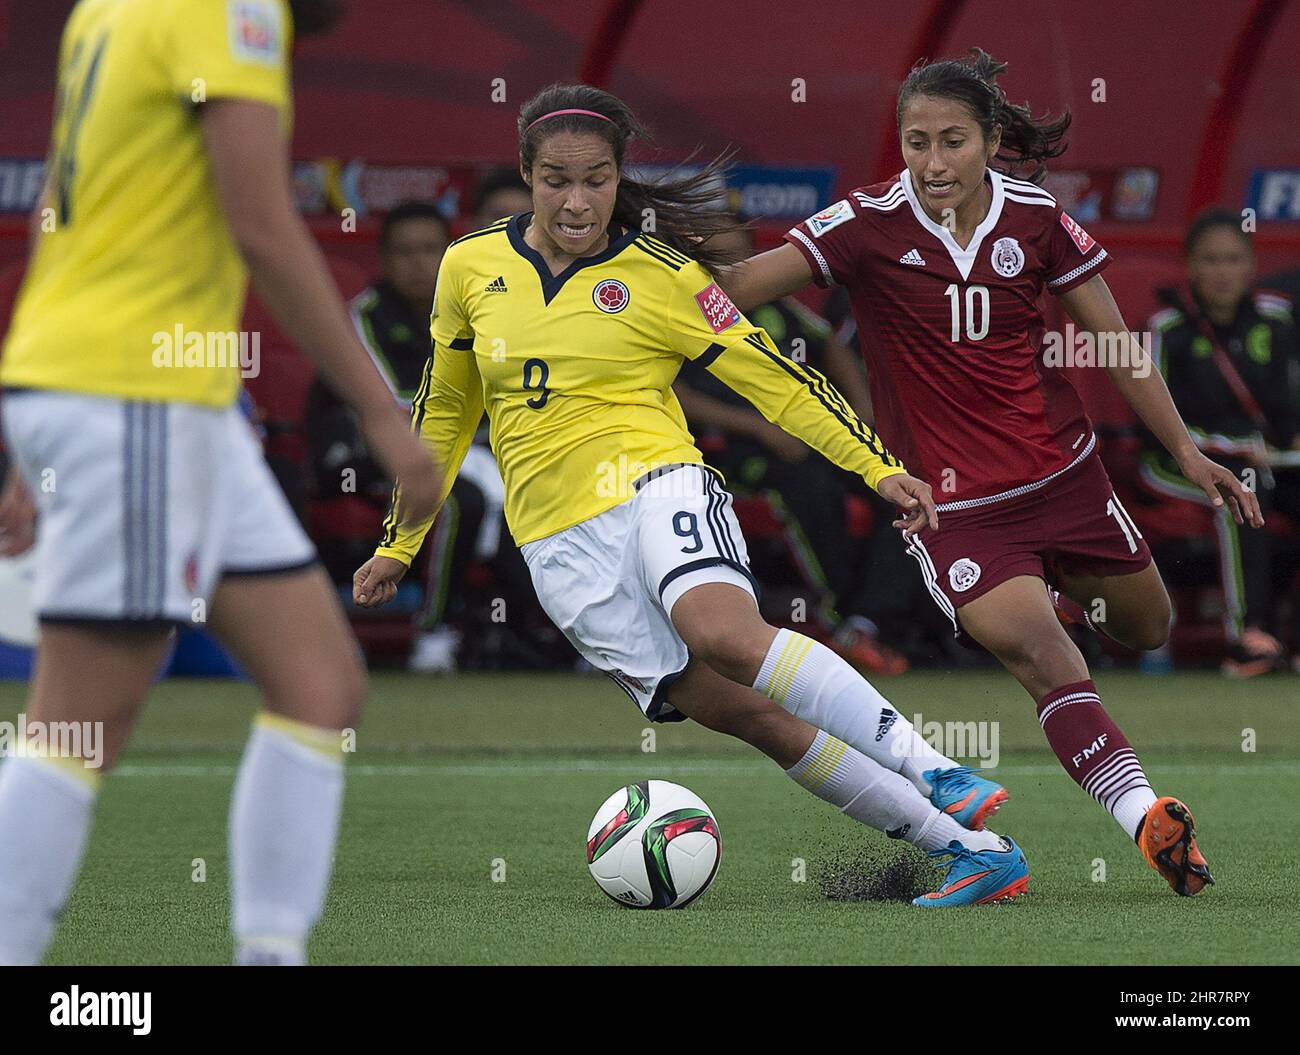 Mexico's Stephany Mayor, right, and Colombia's Orianica Velasquez fight for the ball during FIFA Women's World Cup second half soccer action in Moncton, N.B. on Tuesday, June 9, 2015. THE CANADIAN PRESS/Andrew Vaughan Stock Photo